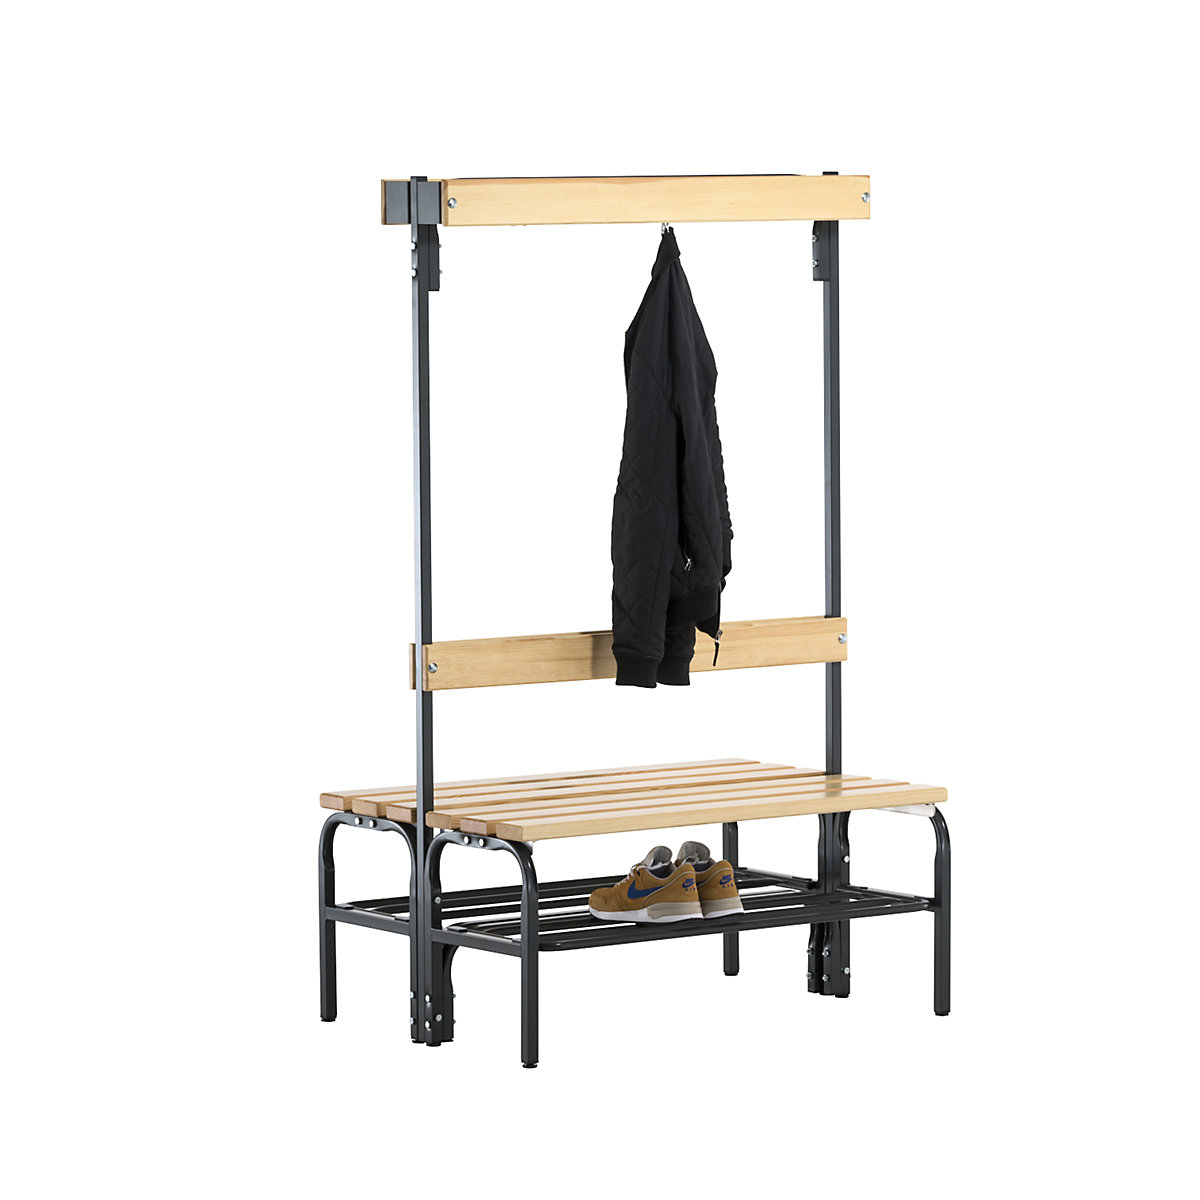 Sypro – Cloakroom bench with hook strips, double-sided, 6 hooks, 1015 mm, charcoal, shoe rack